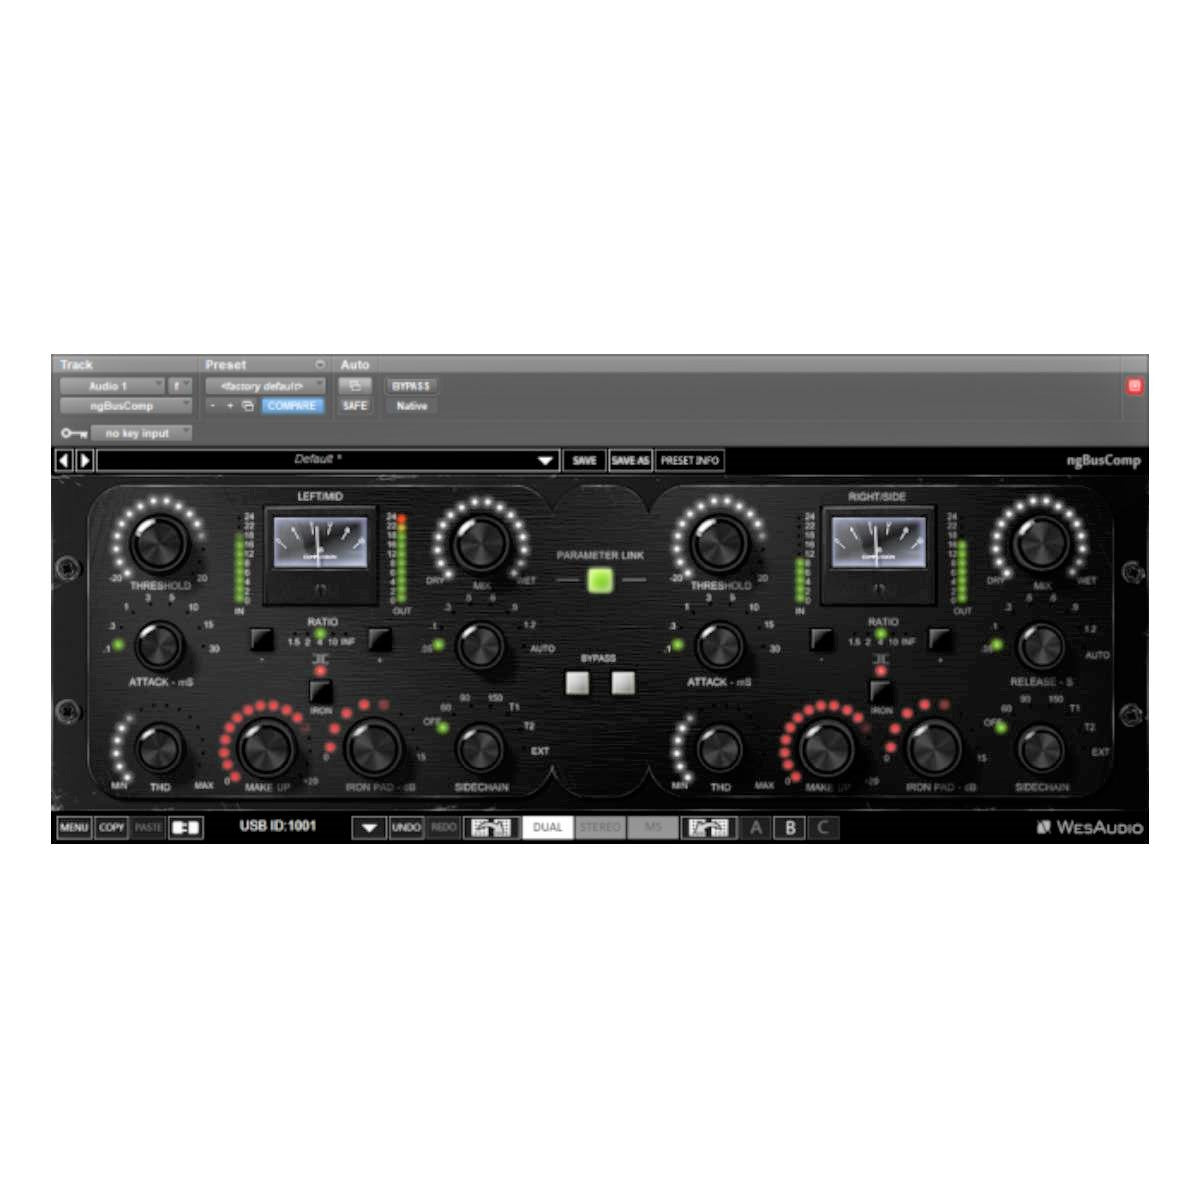 WesAudio ngBusComp Analog Bus Compressor with remote plugin control